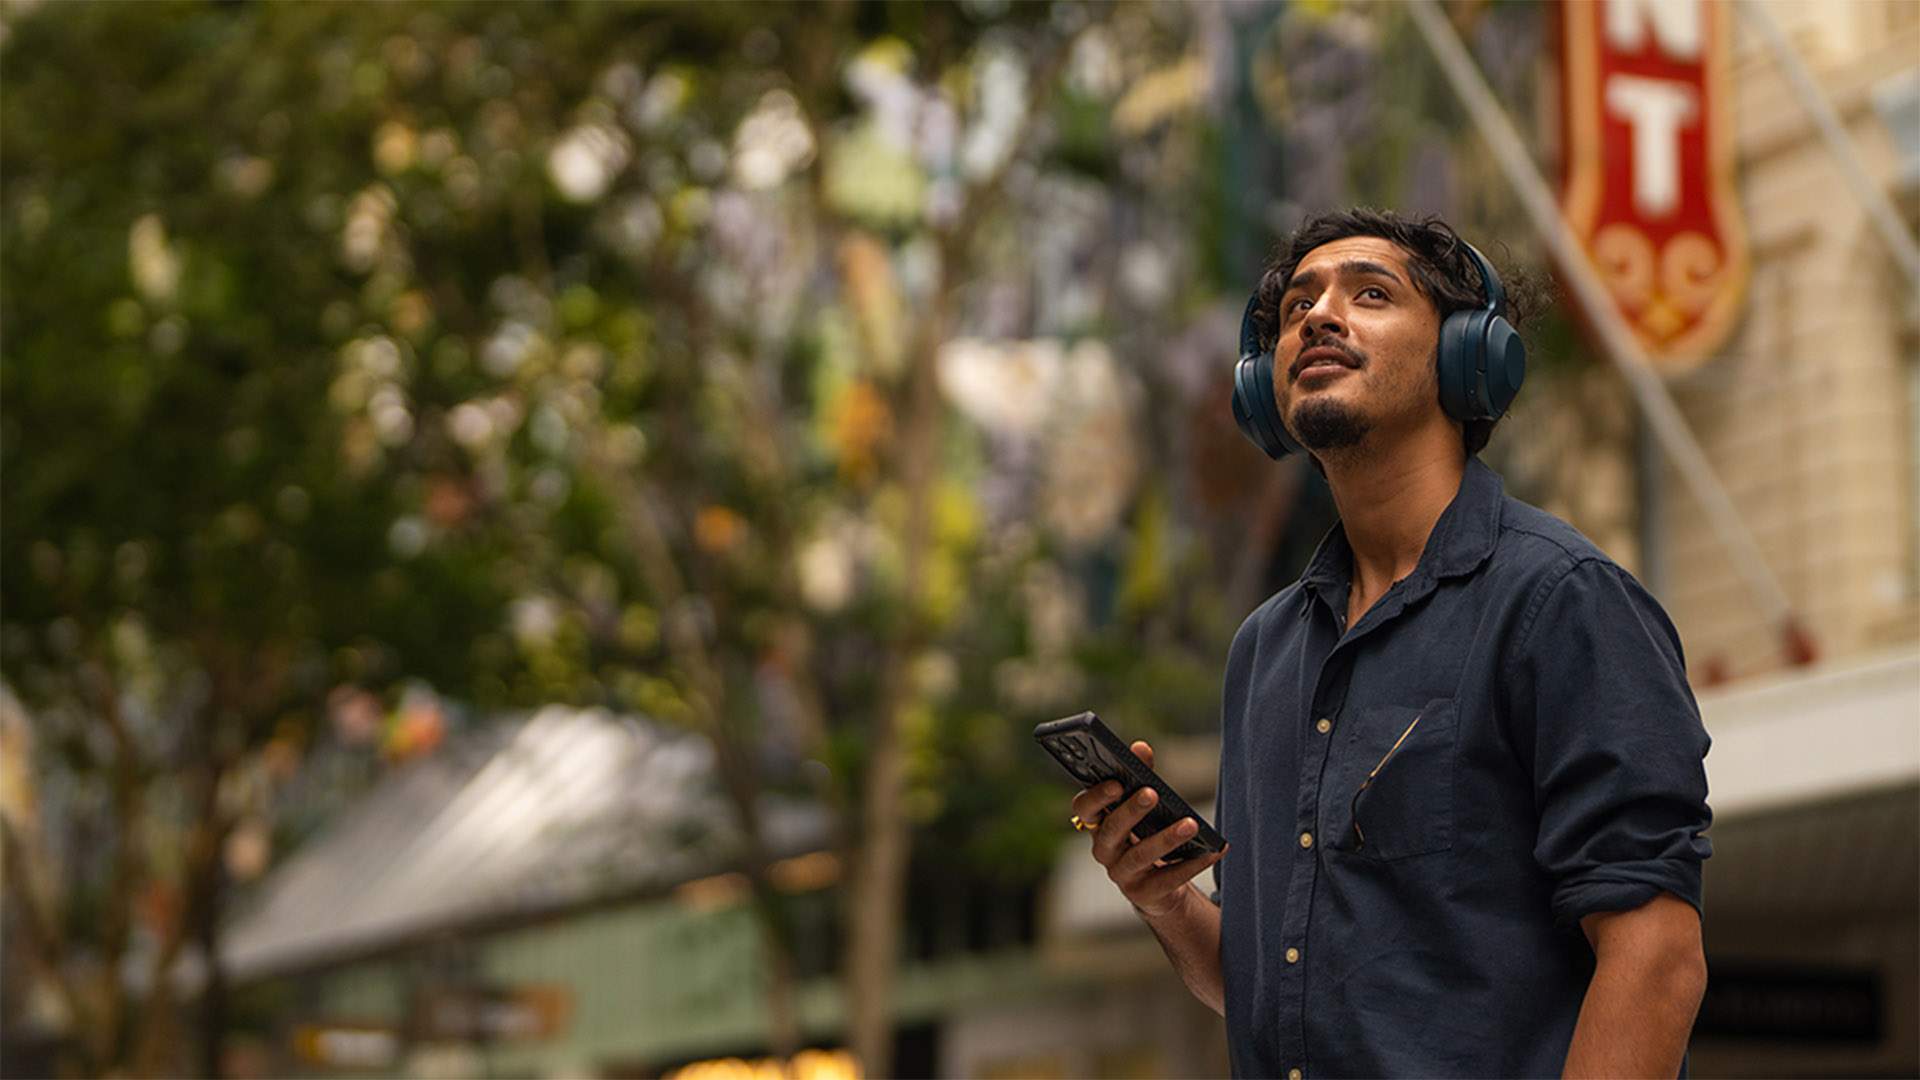 New Audio Experience 'City Symphony' Gives Walking Brisbane's Streets a Cinematic Soundtrack